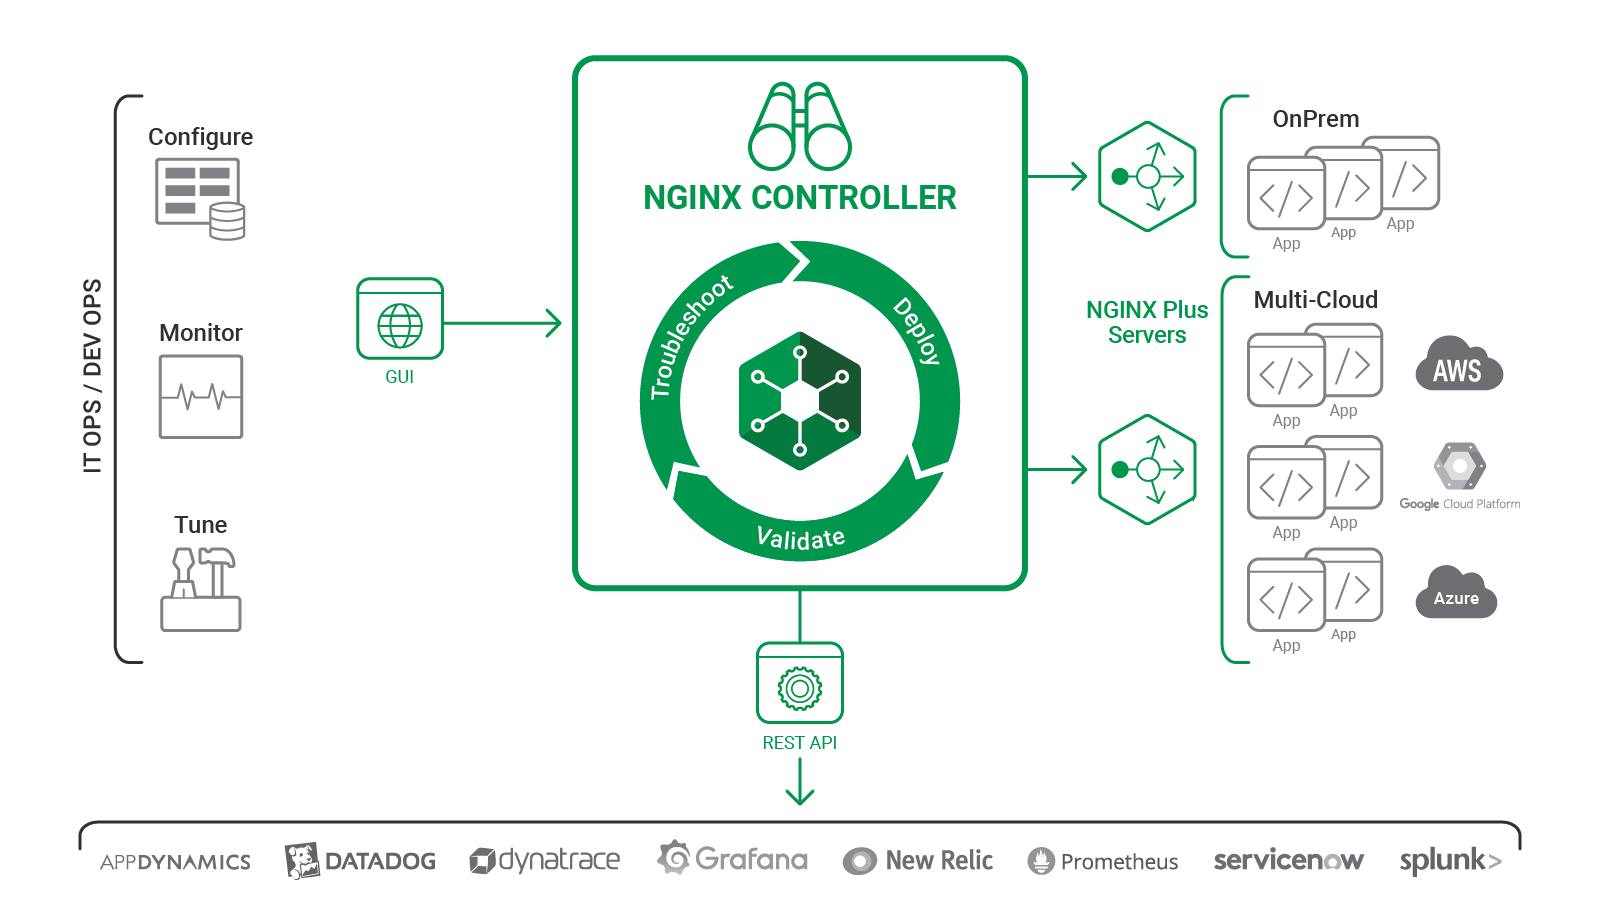 Graphic showing NGINX Controller interaction with users, servers, and other management and monitoring tools. 